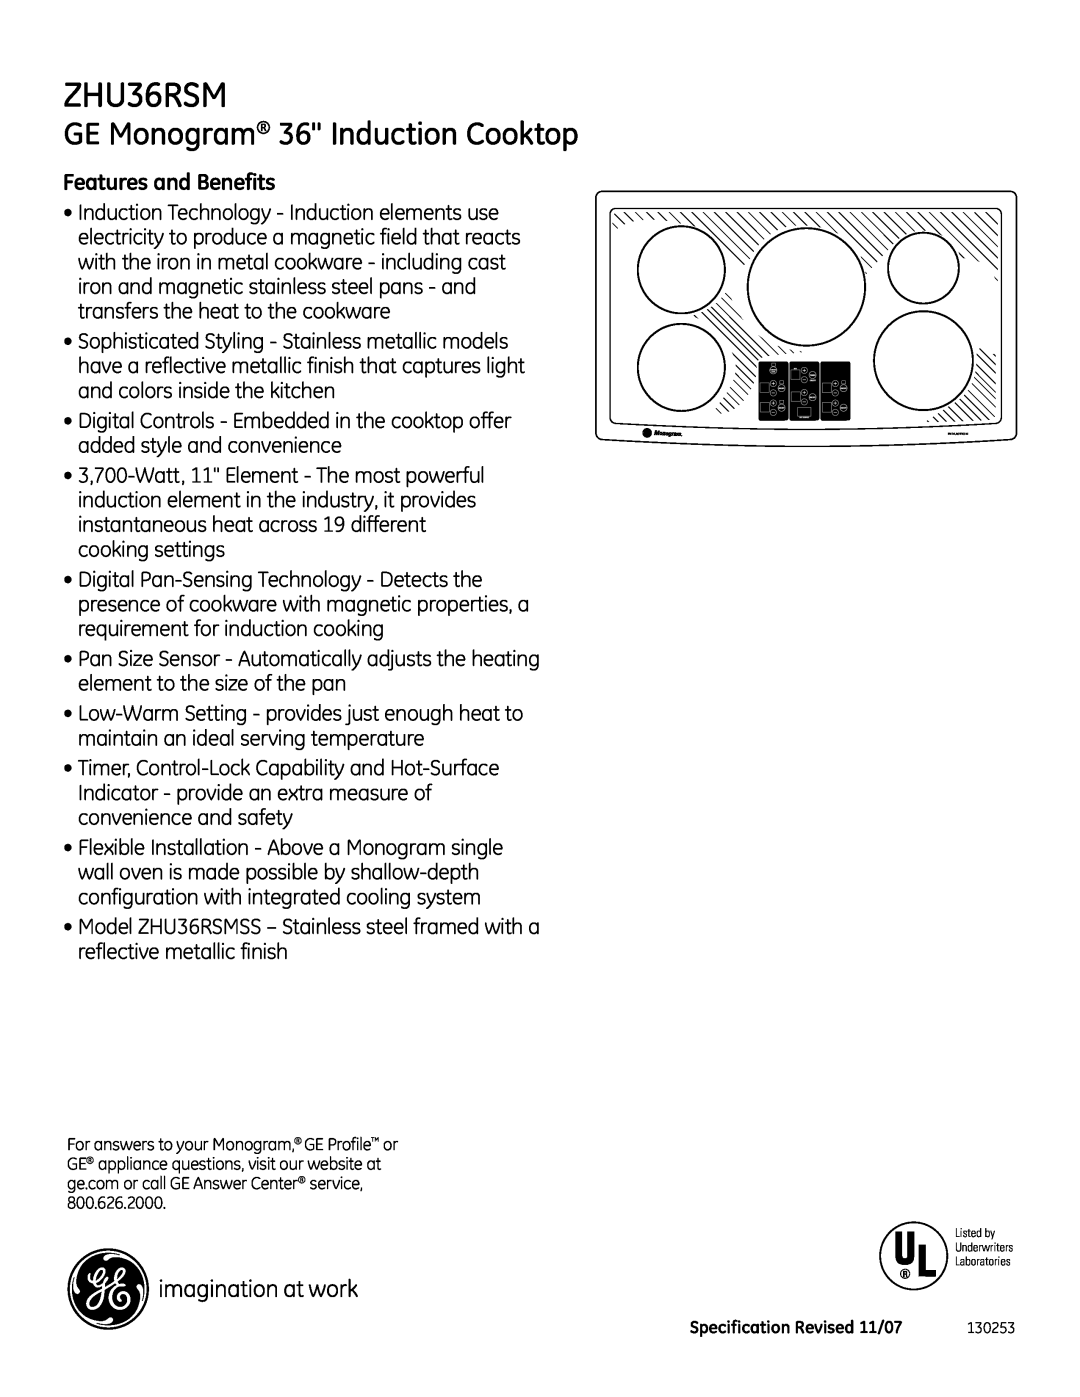 GE Monogram ZHU36RSM GE Monogram 36 Induction Cooktop, Features and Benefits, Listed by Underwriters Laboratories 